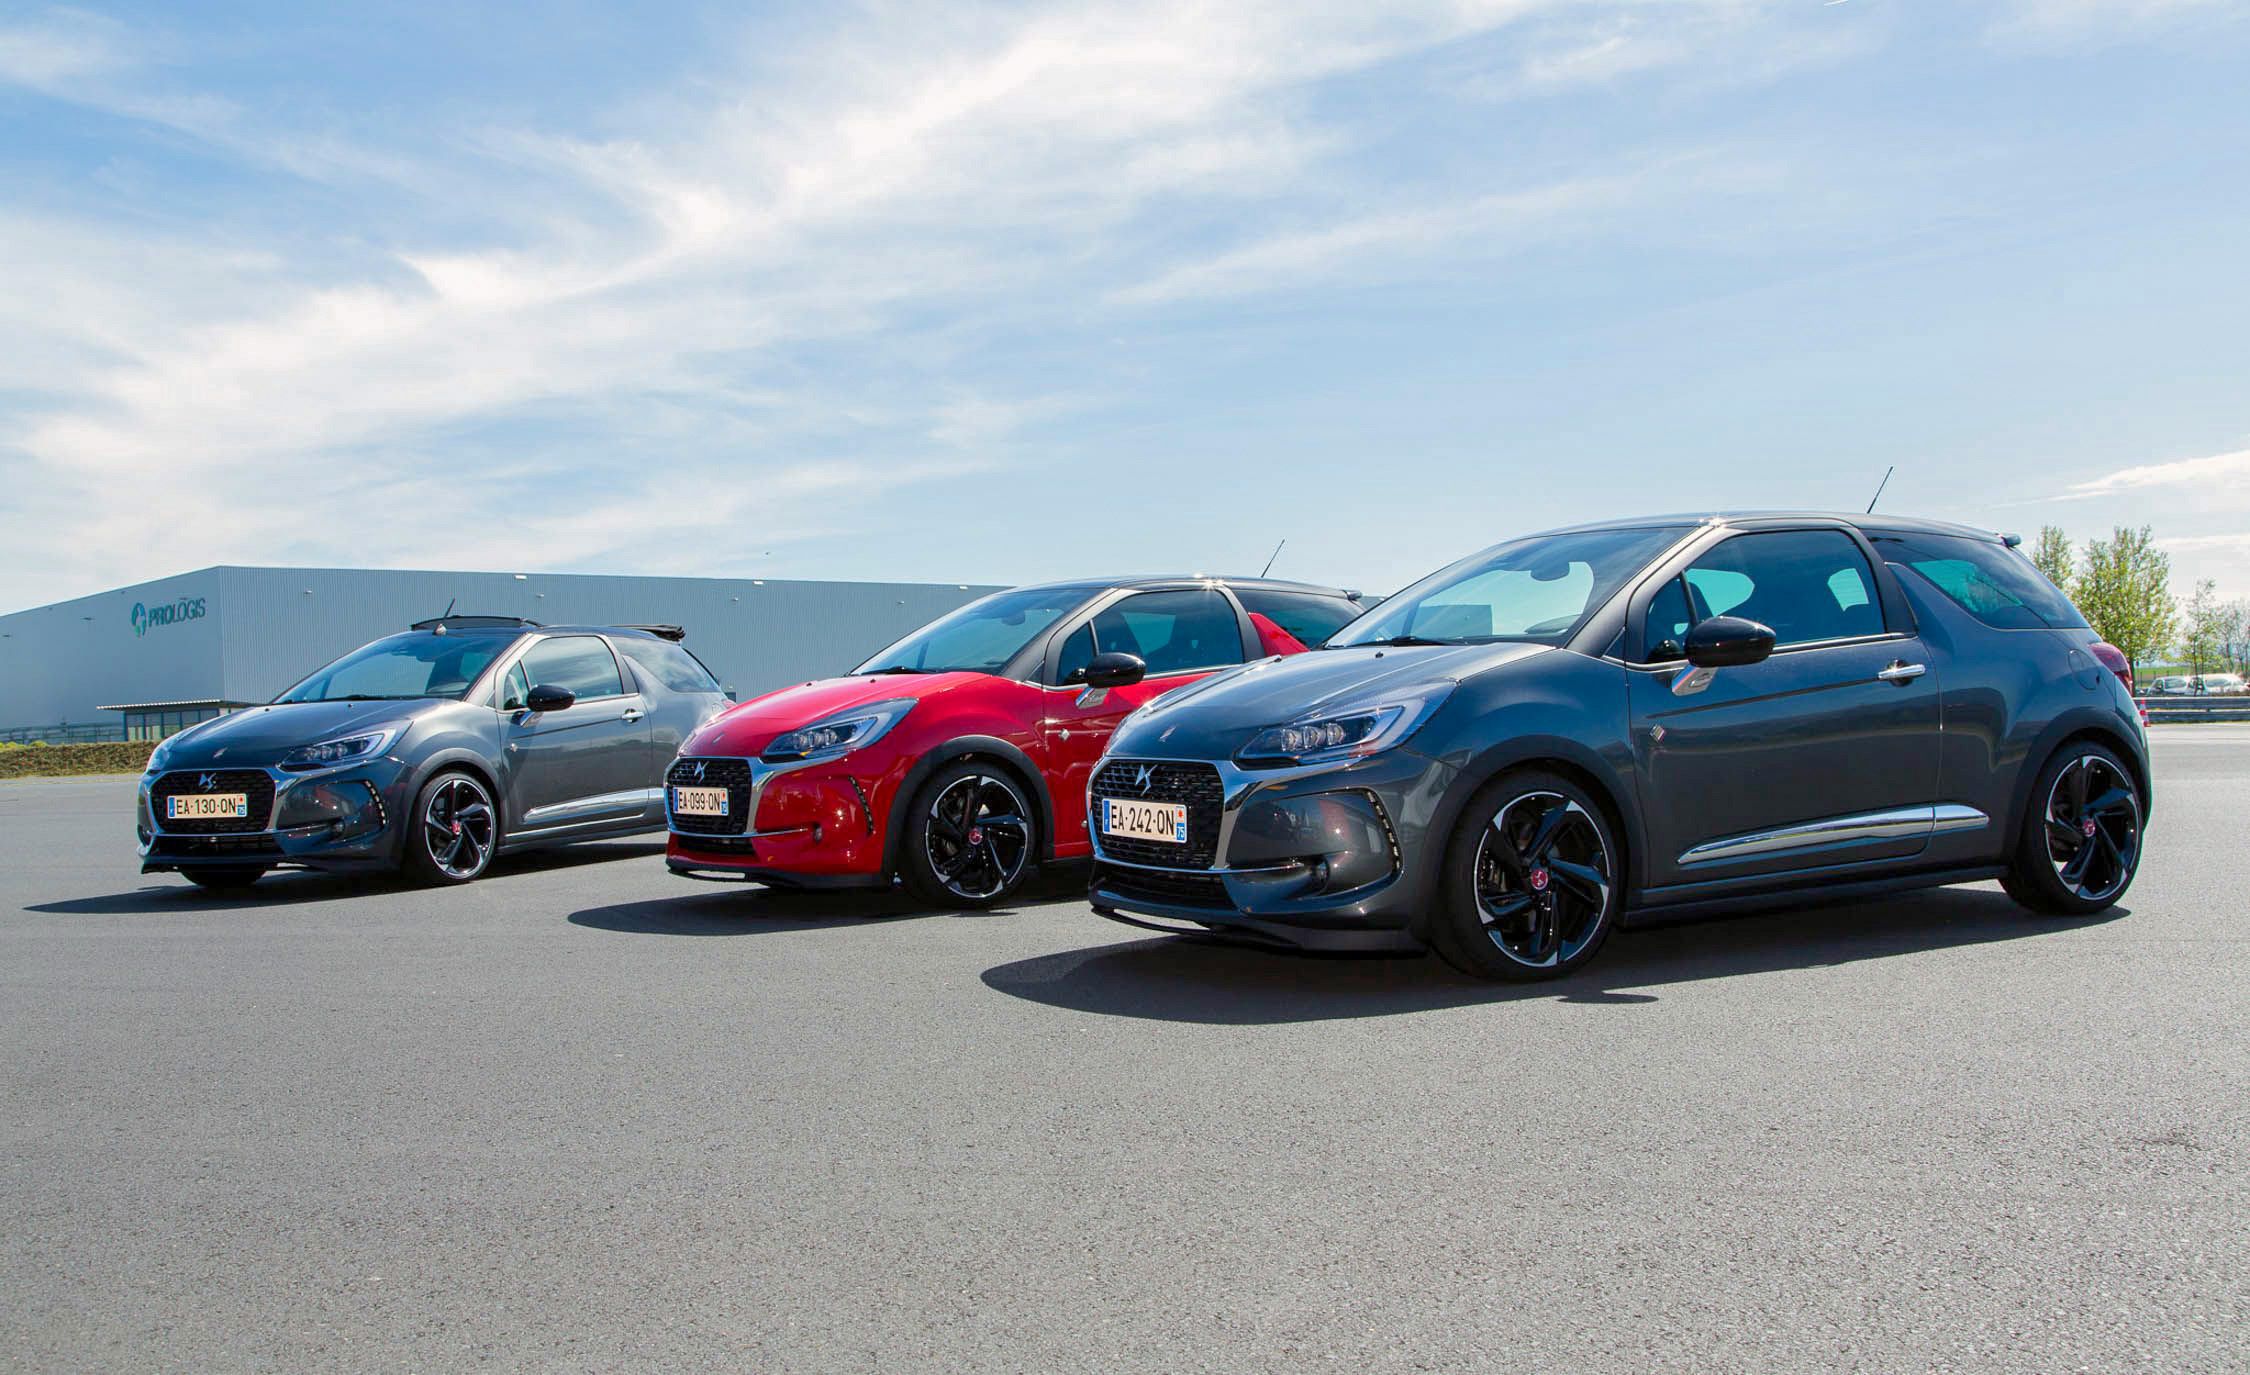 Judging the French competition: Citroen DS3 drive review